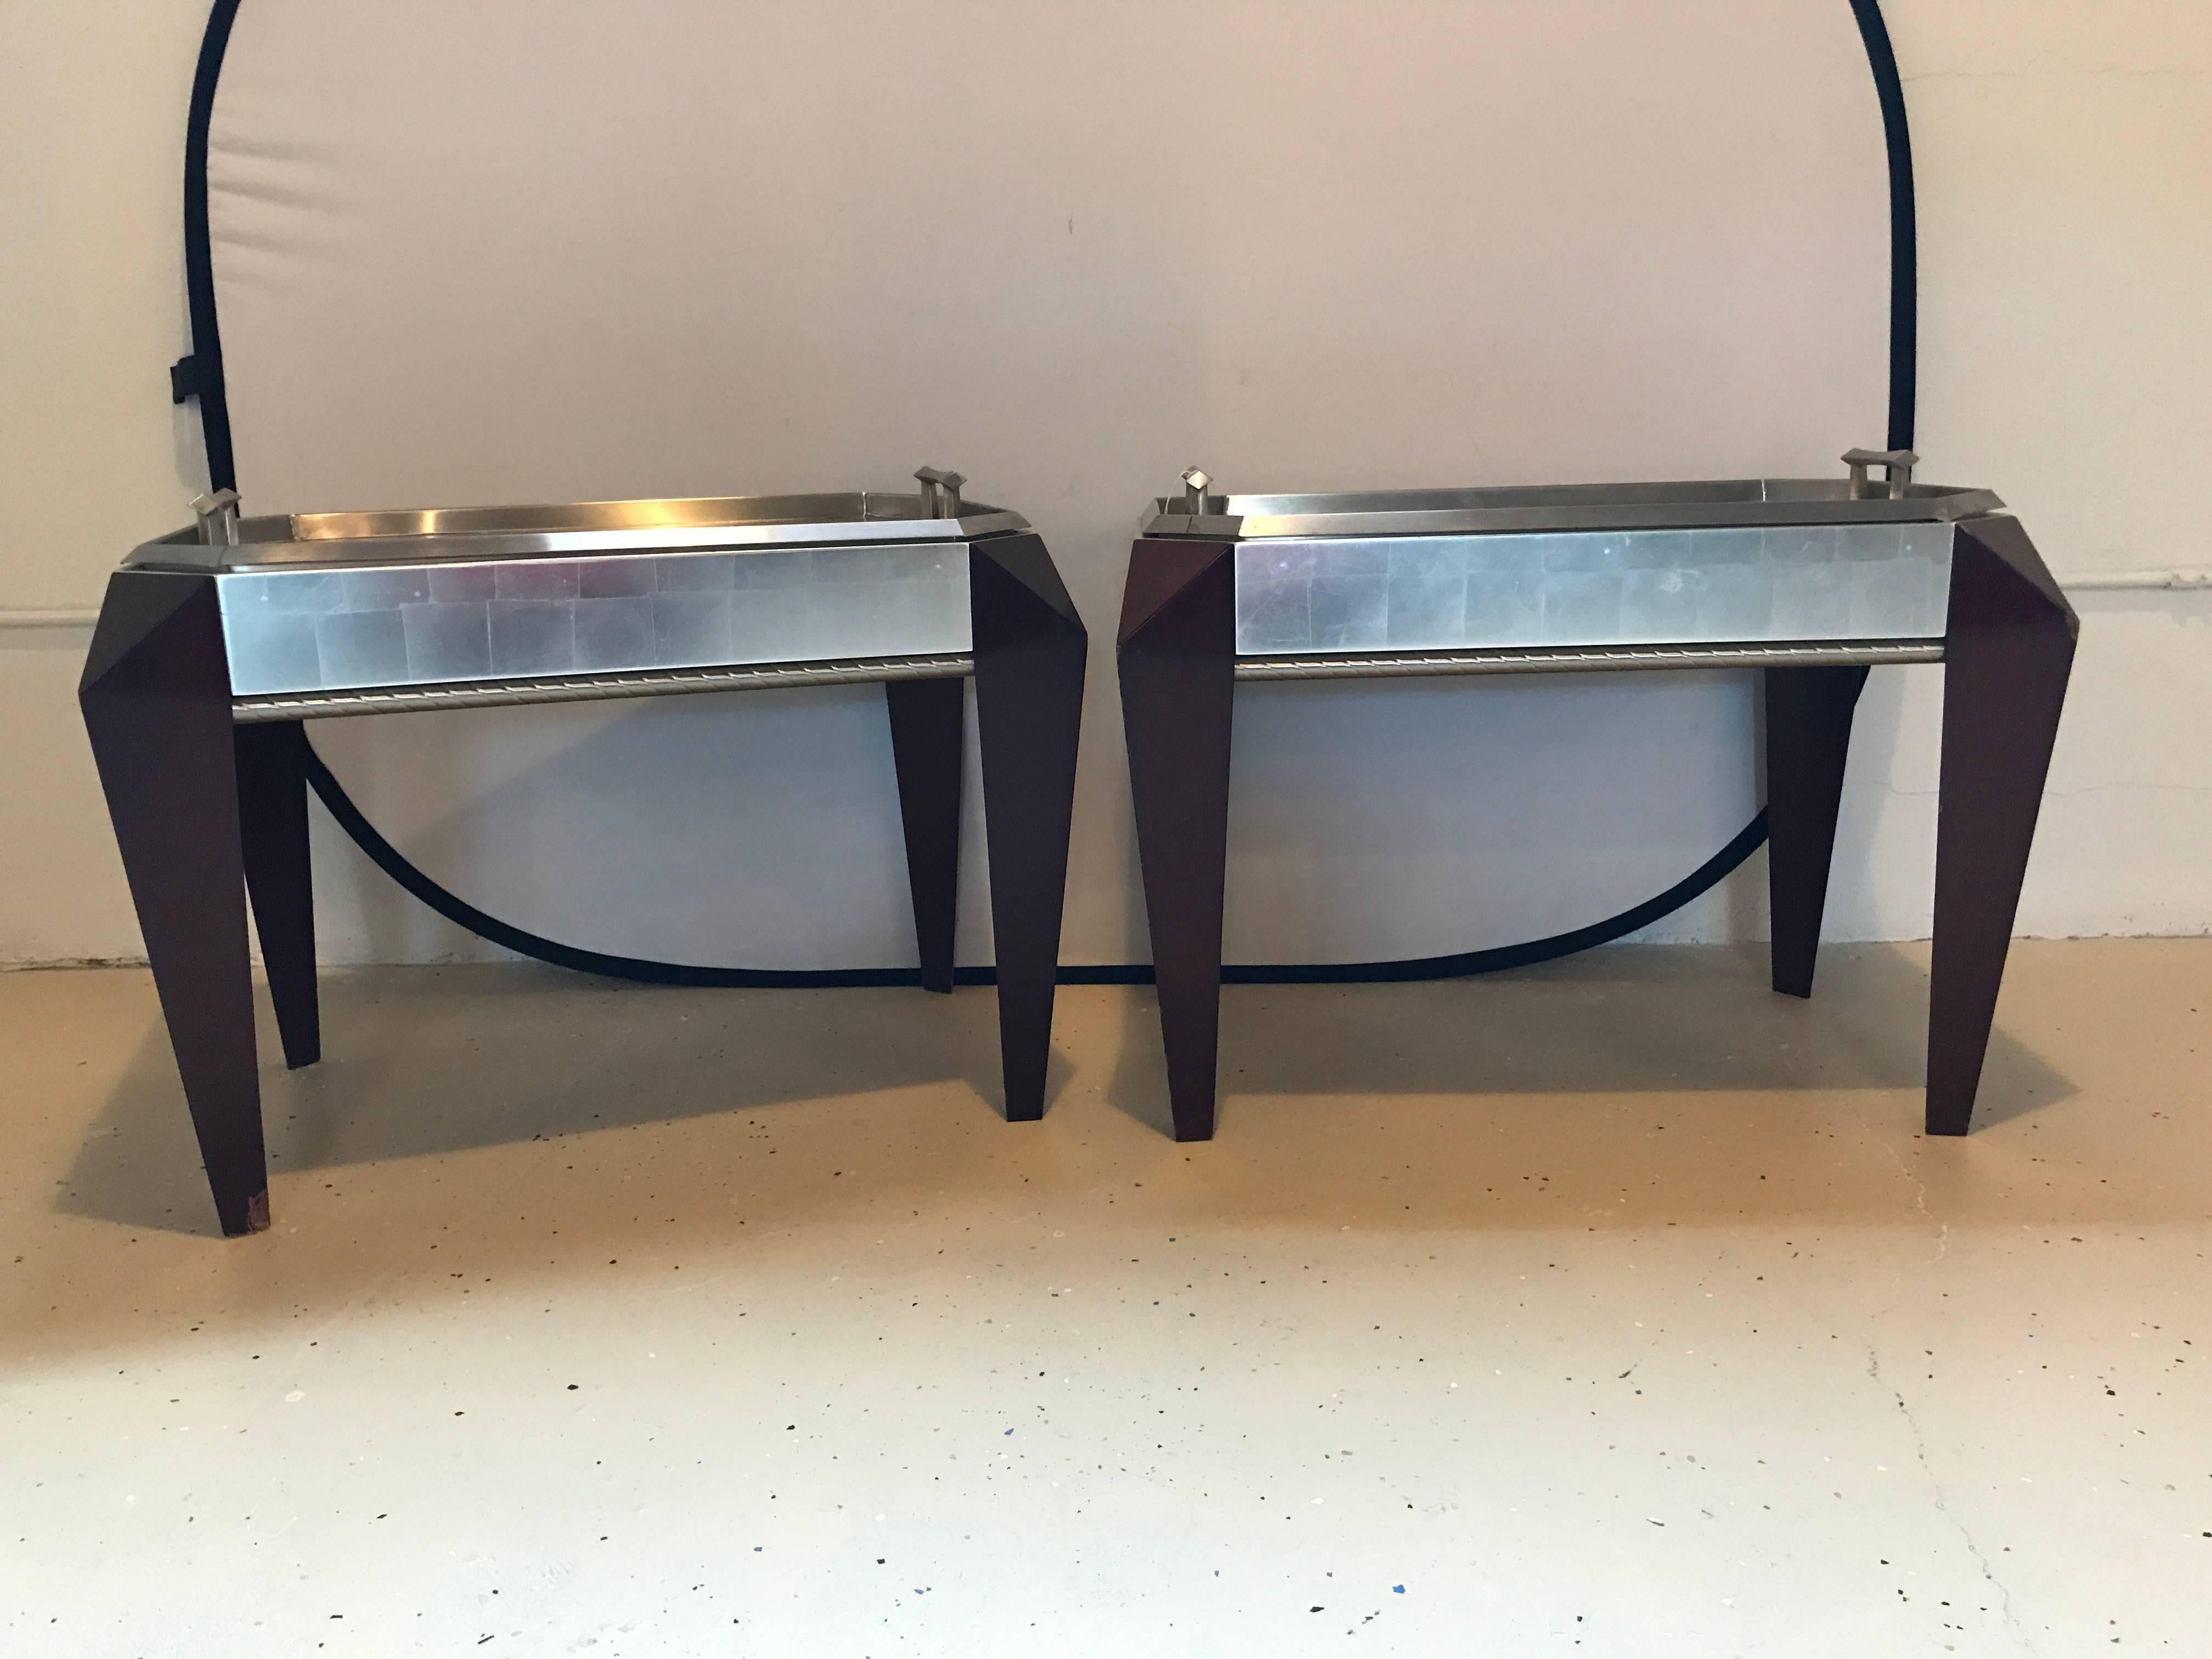 Pair of Hollywood Regency Style Dakota Jackson stainless steel serving trays on mahogany legs. These finely crafted, highly functional serving trays can sit on their mahogany bases or can easily be removed to serve. Both octagonal shaped trays have